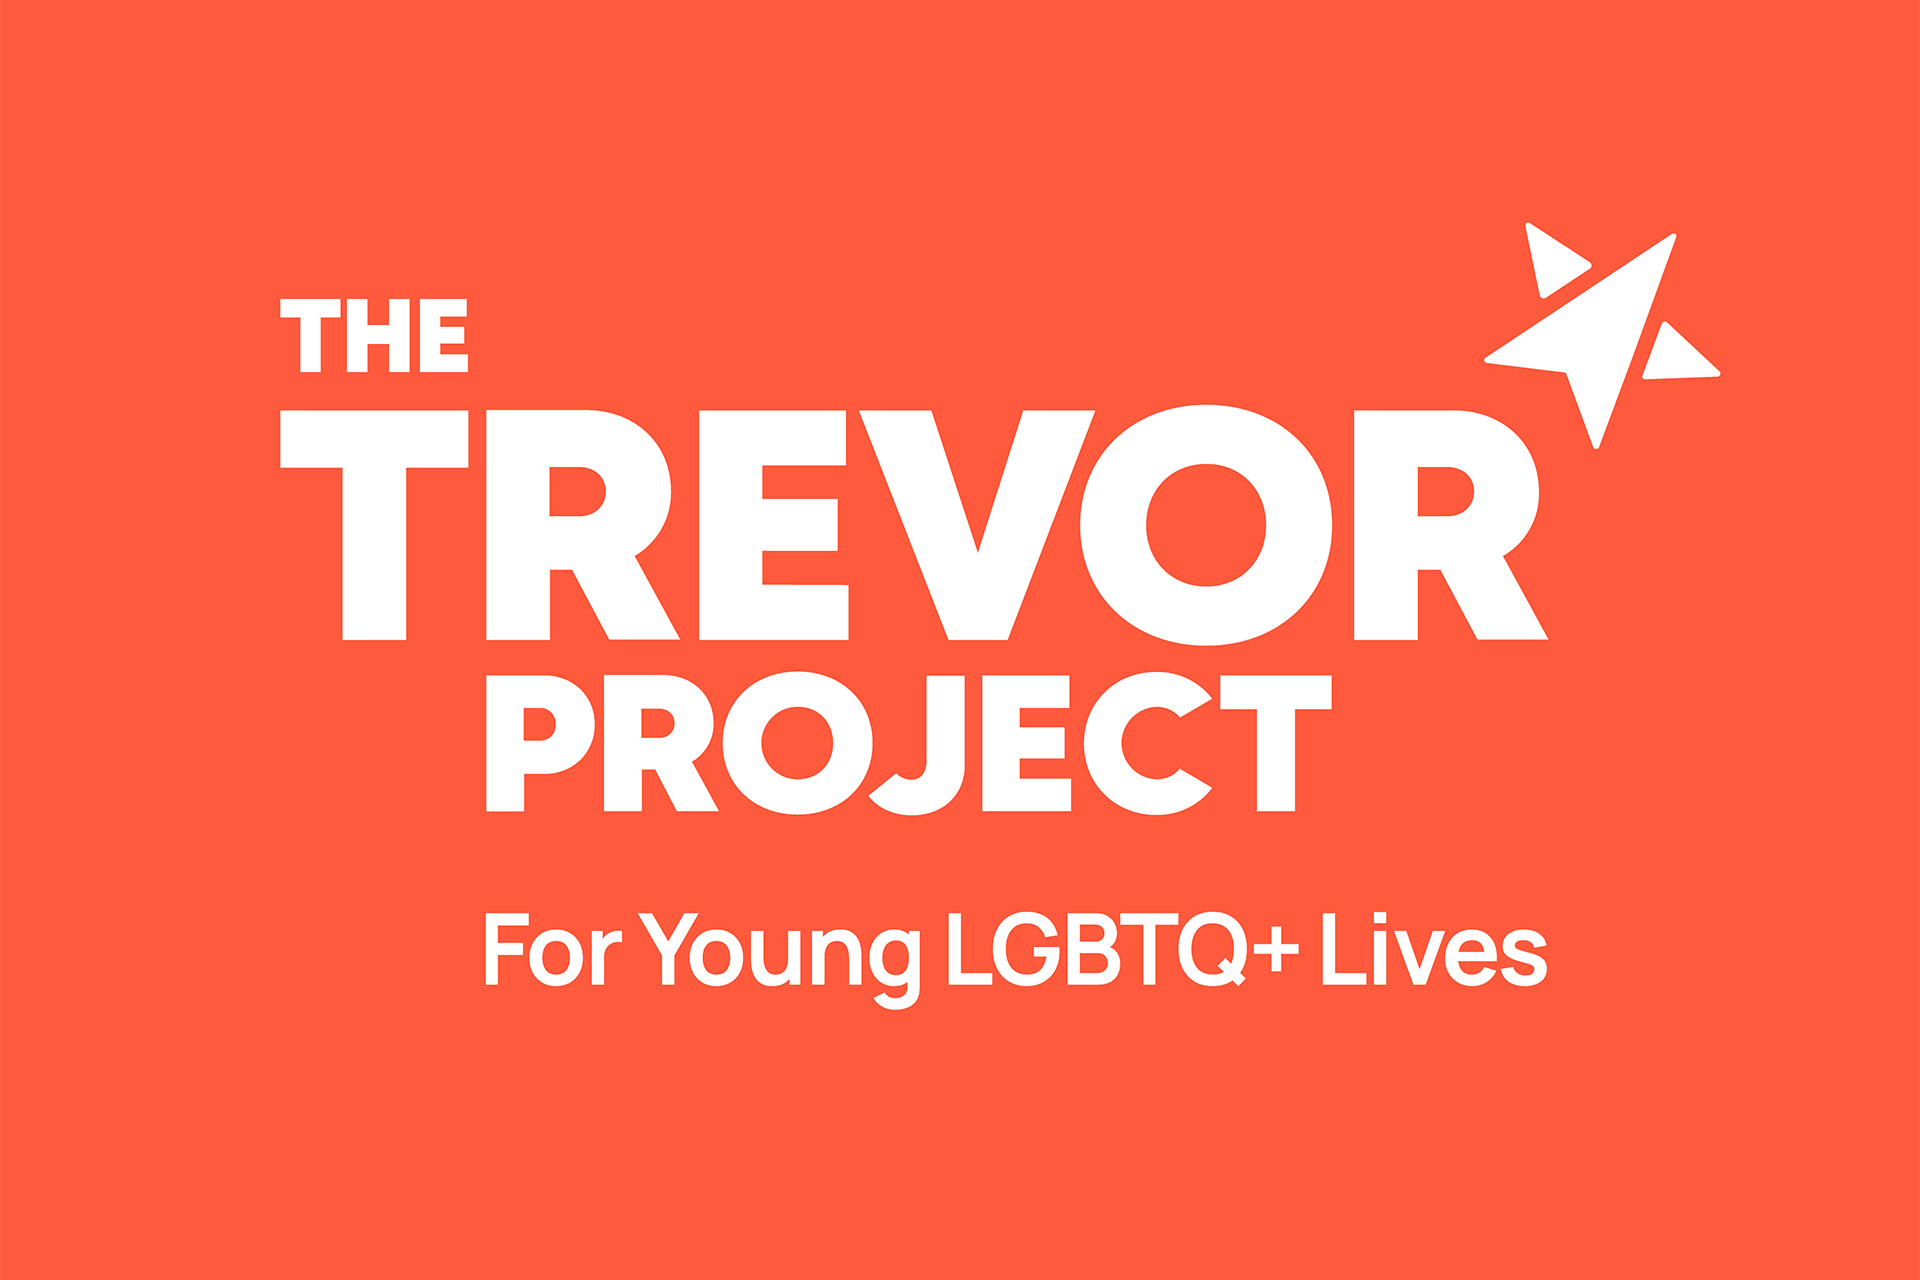 Journeys is proud to support The Trevor Project, the leading crisis intervention and suicide prevention organization for LGBTQ+ young people